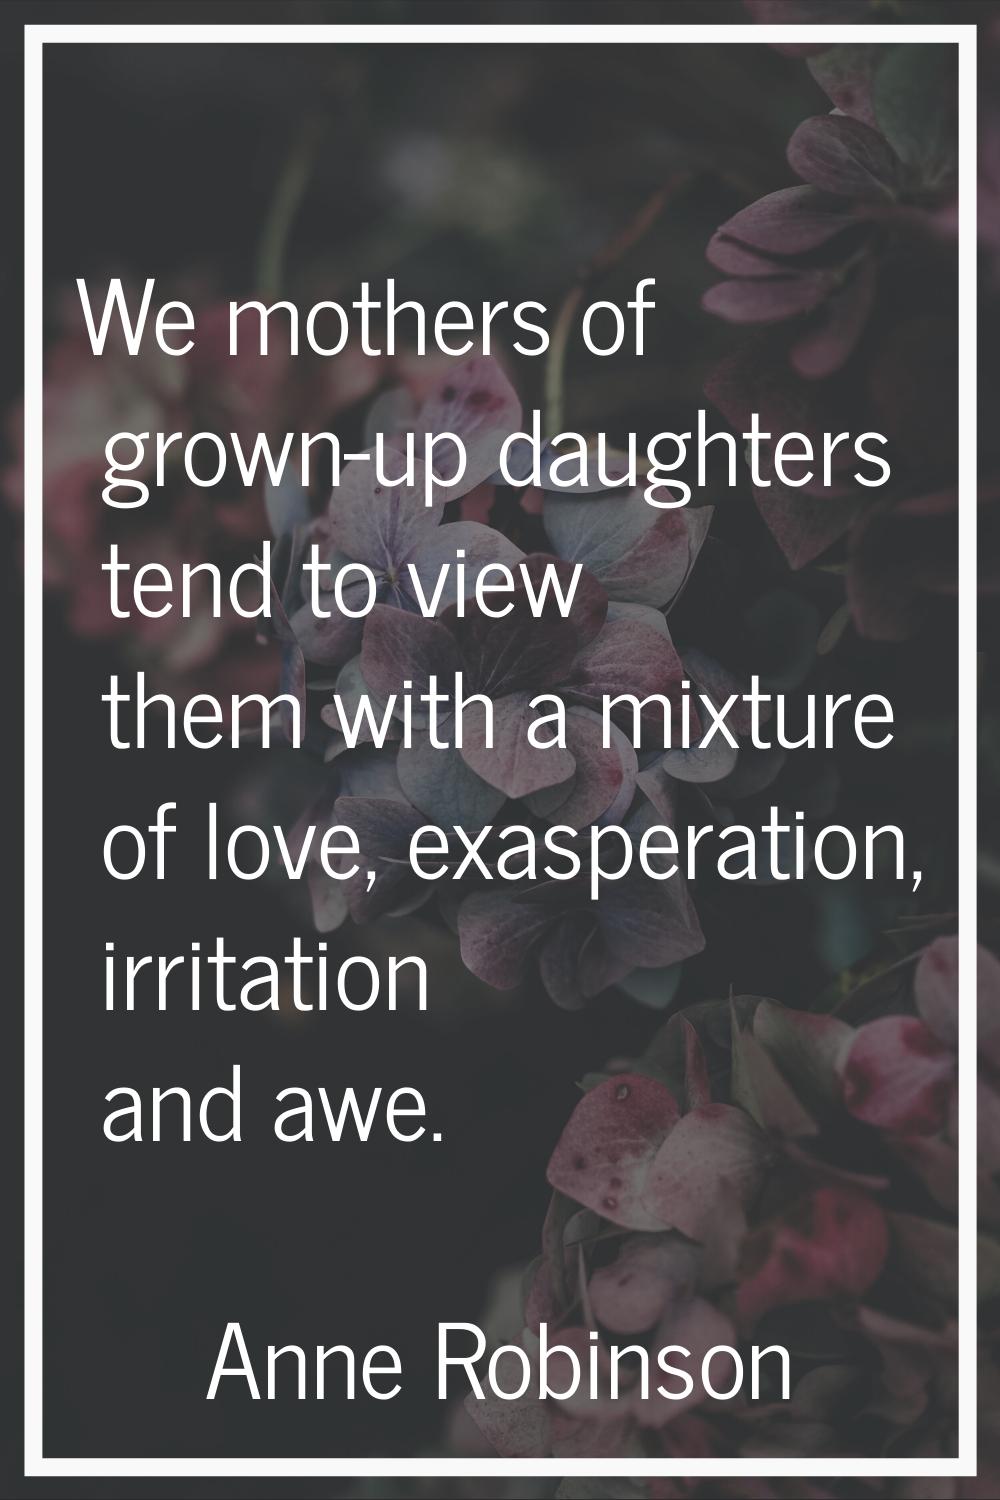 We mothers of grown-up daughters tend to view them with a mixture of love, exasperation, irritation